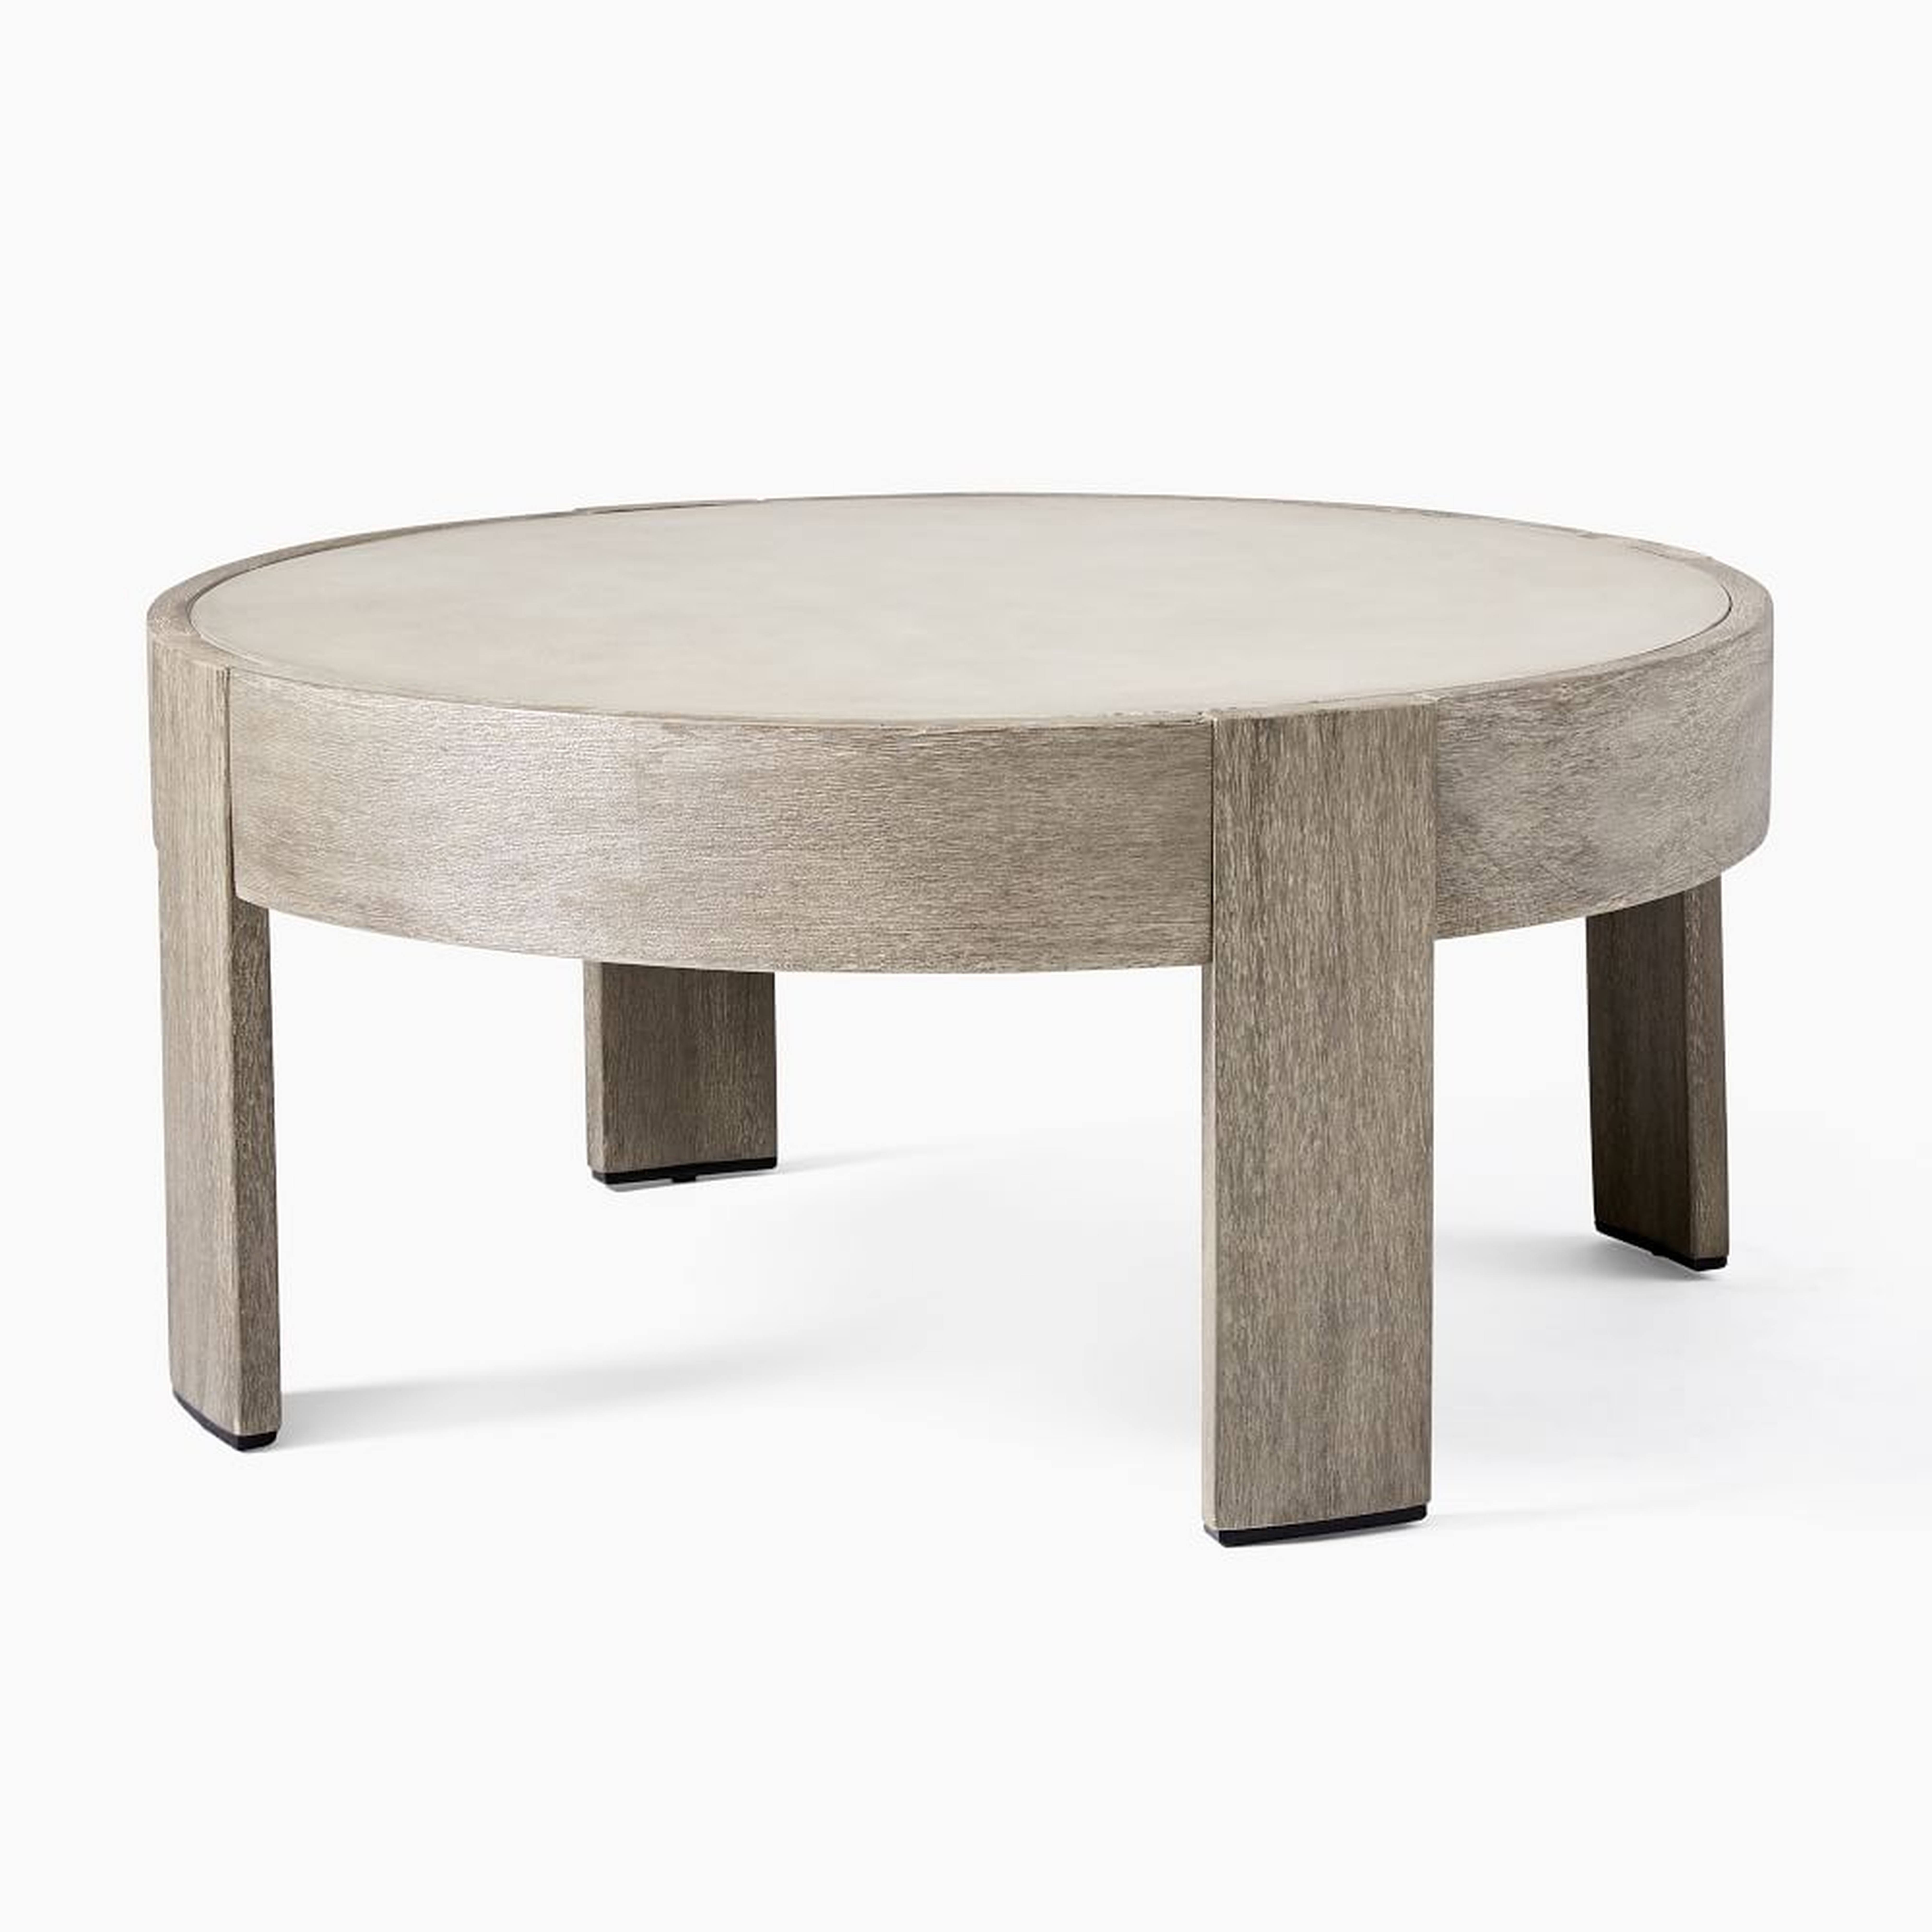 Portside Outdoor Round Concrete Coffee Table, Weathered Gray - West Elm